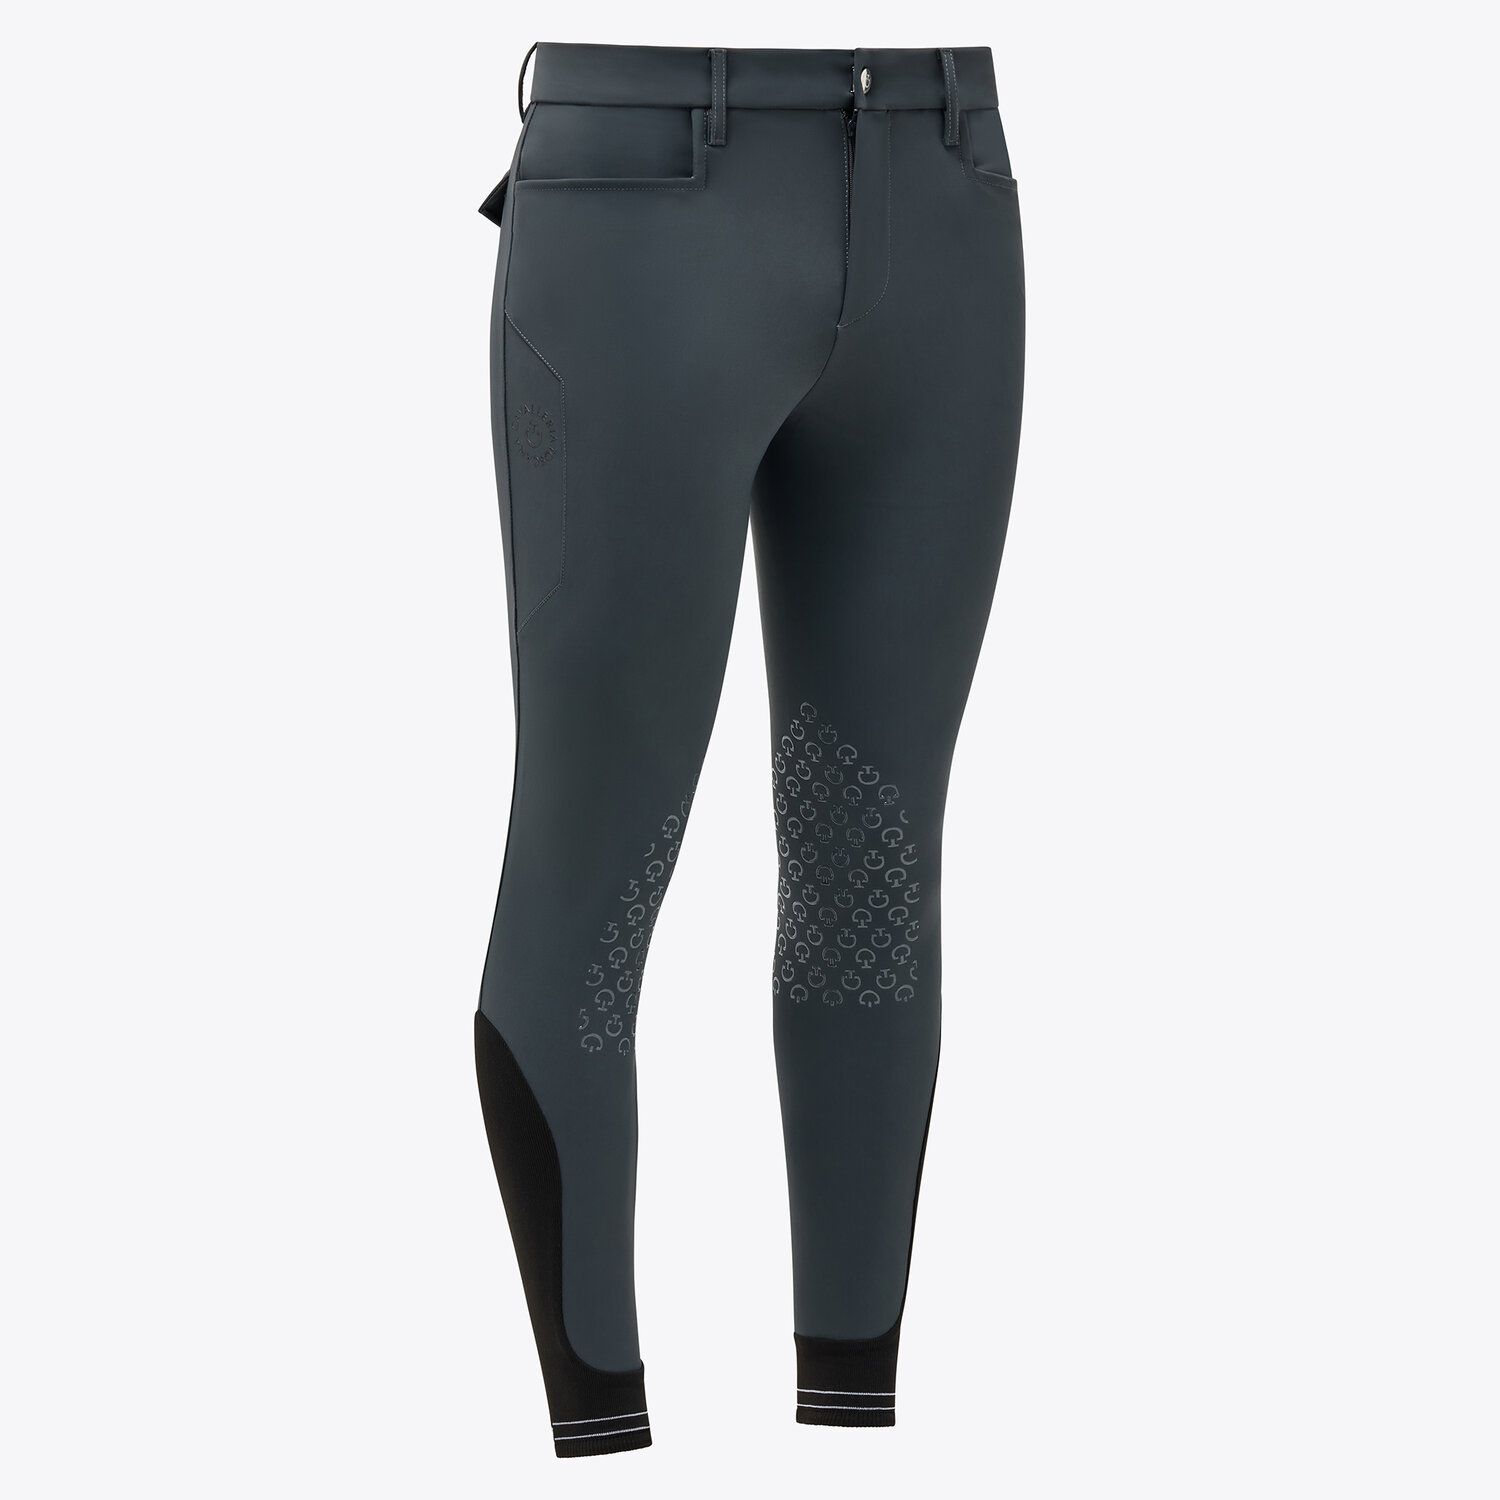 Cavalleria Toscana Men’s four-way stretch performance riding breeches CHARCOAL GREY-1